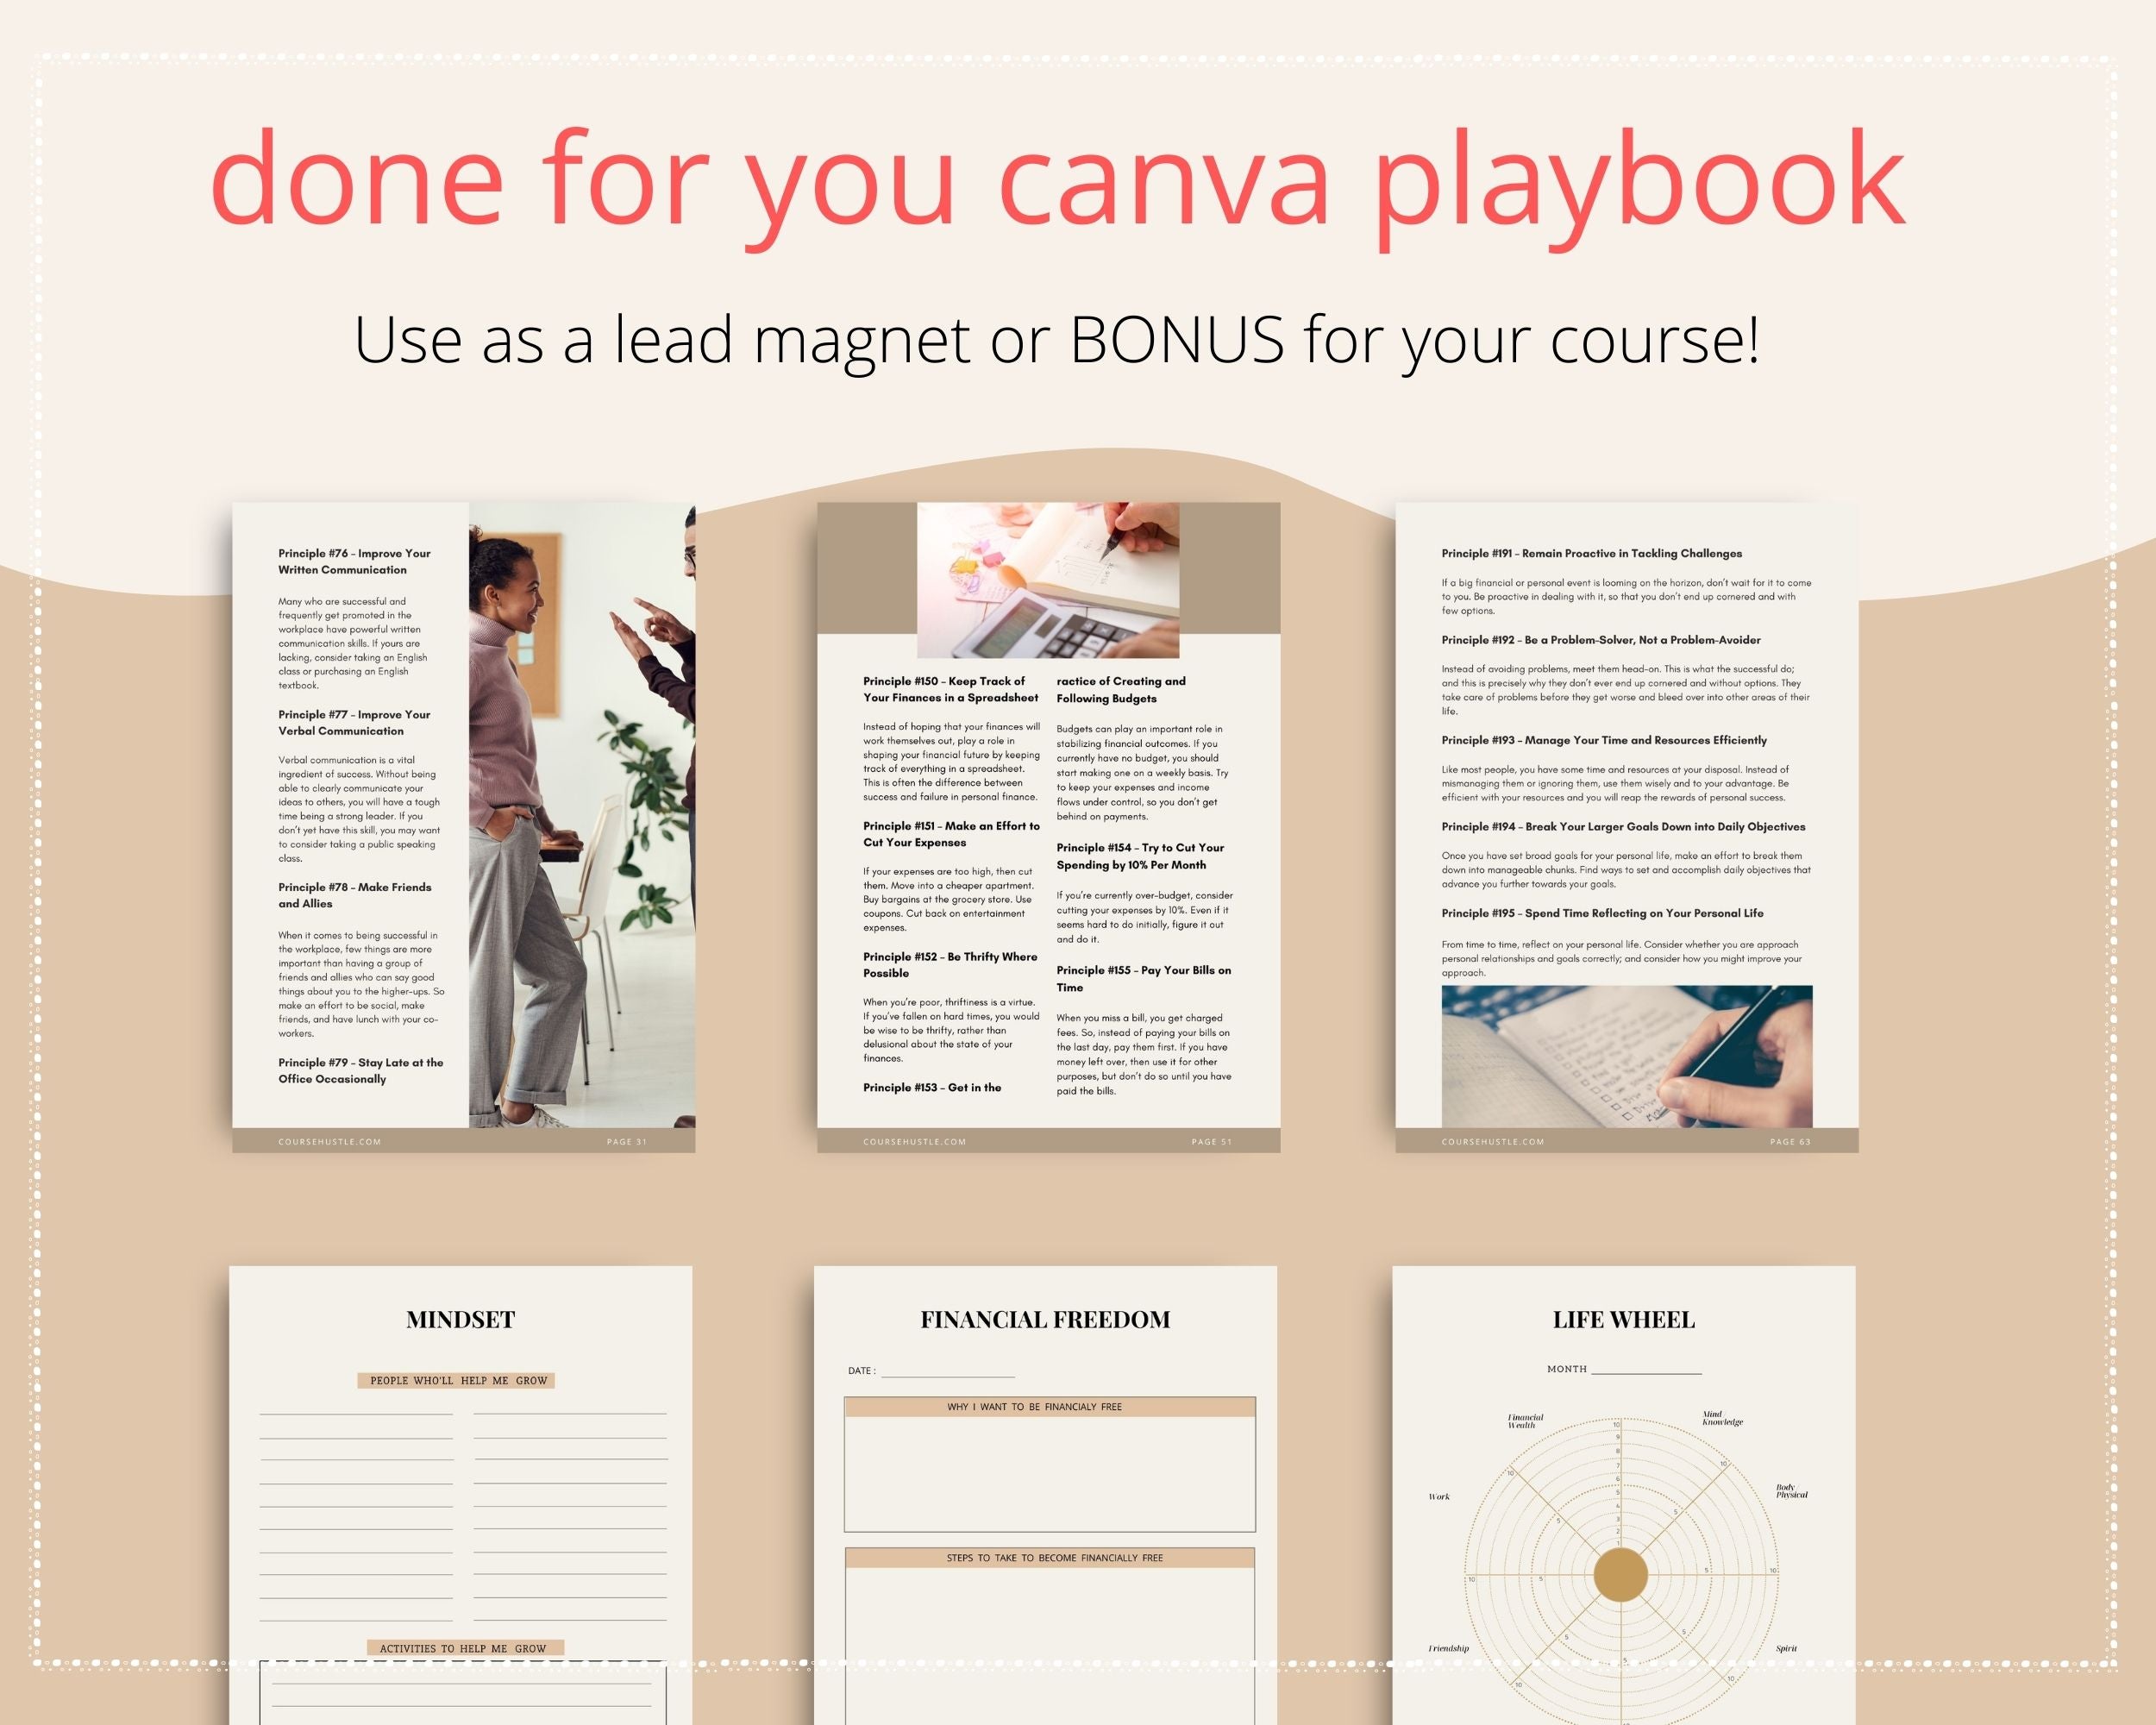 Done-for-You 220 Success Principles Tips, Tricks & ideas Playbook in Canva | Editable A4 Size Canva Template €23.59